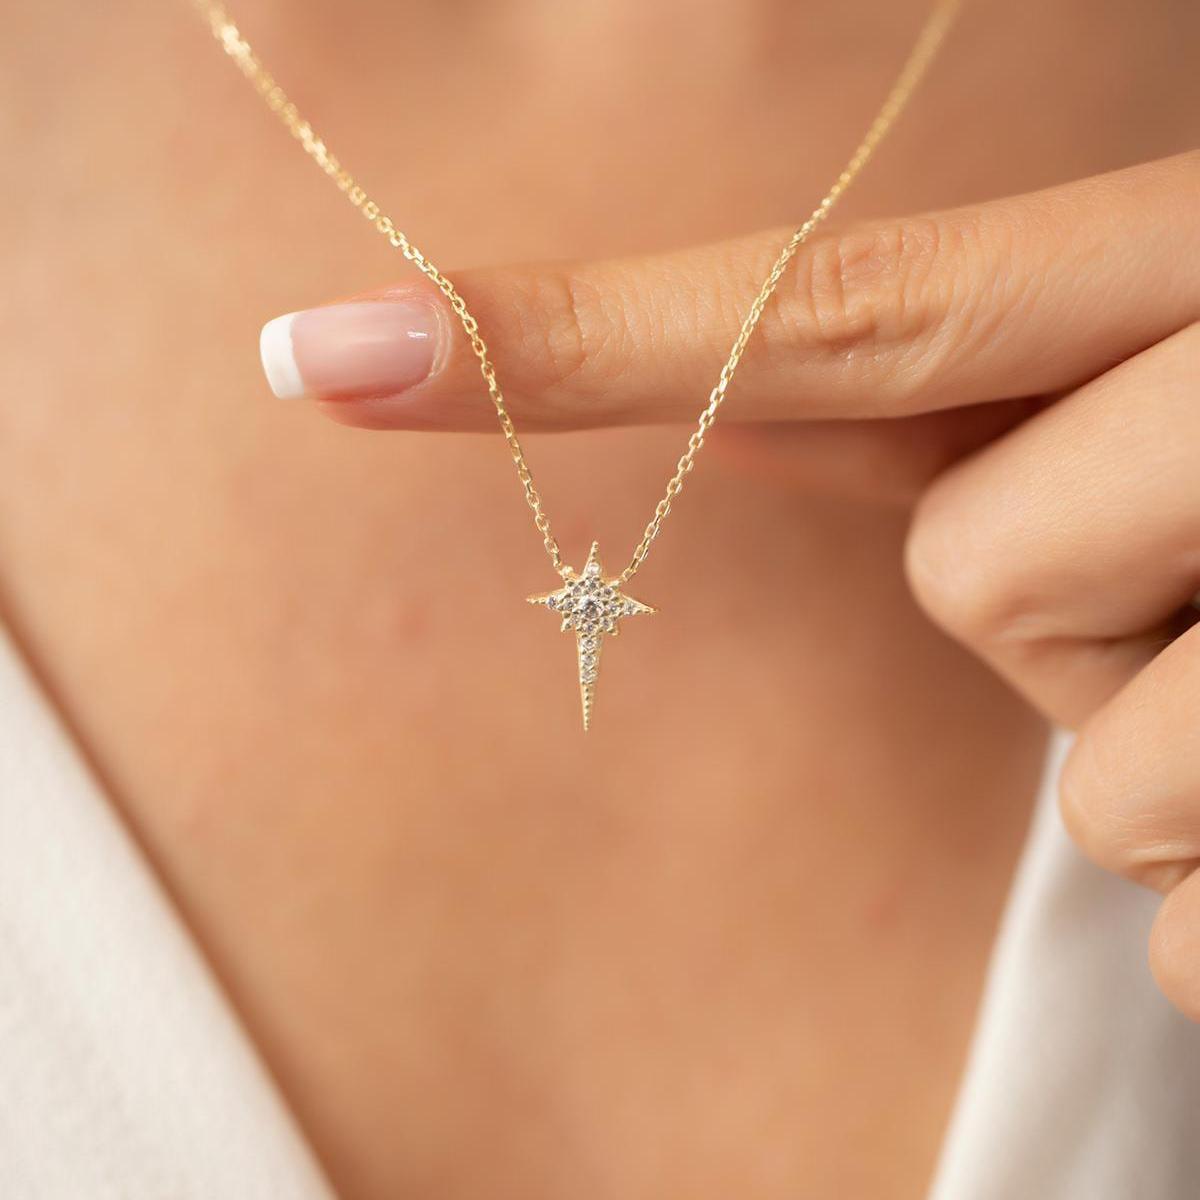 North Star Necklace • Star Necklace Gold • Gold Star Necklace - Trending Silver Gifts